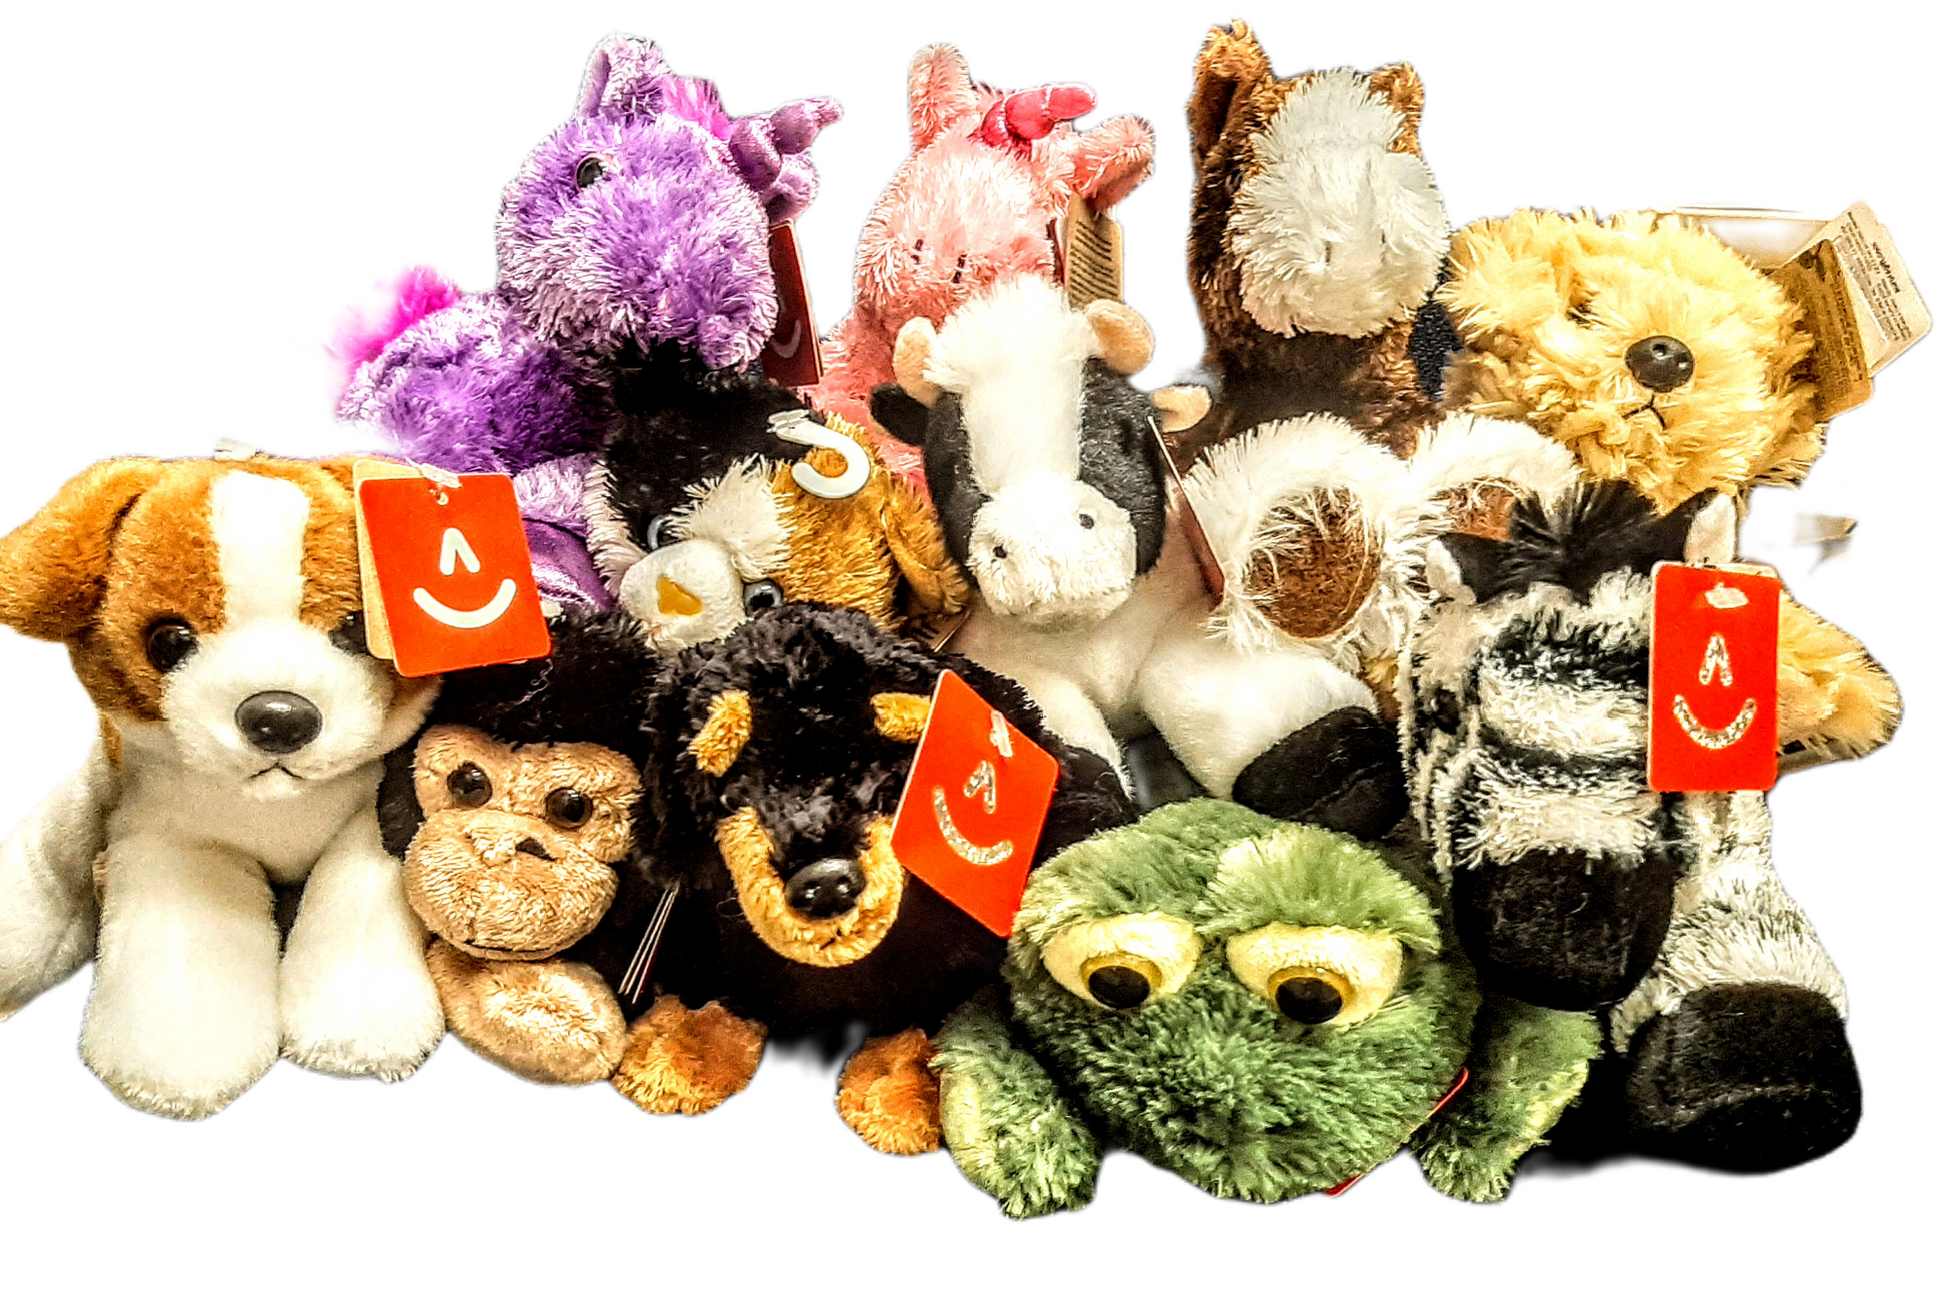 So soft and cuddly, sure to become someones best friend!  Choose from Pink Unicorn, Purple Unicorn, Horse, Frog, Chimpanzee, Calico Cat, Dachshund, Golden Doodle, Jack Russell, Zebra, Cow Approximately 8" in size Soft plush body in an adorable floppy pose Safe for all ages Eyes are bolted (locked), glued, and heat sealed on either size of fabric; no stitches to come loose Recommended 3 years +